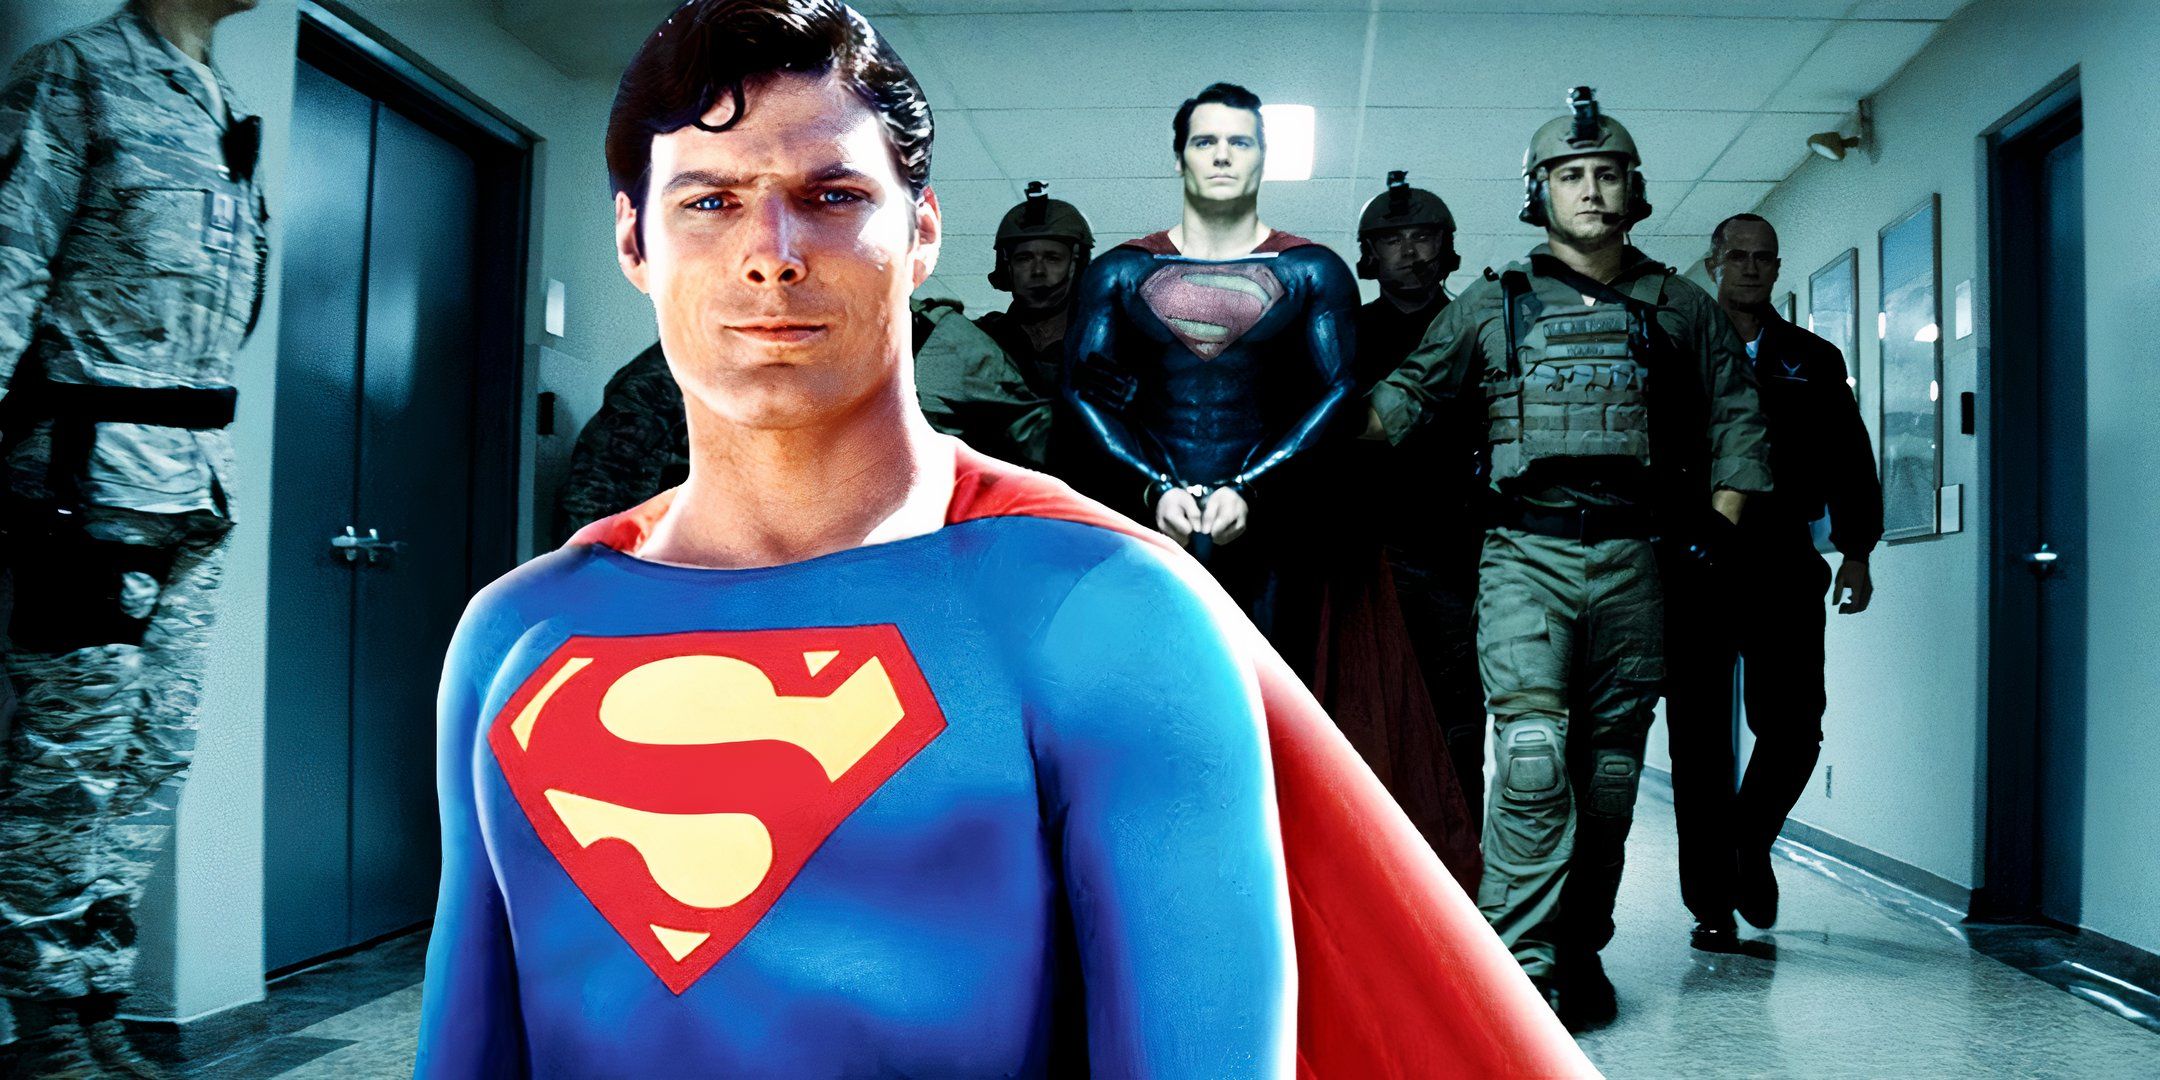 Christopher Reeve as Superman and Henry Cavill in handcuffs from Man of Steel